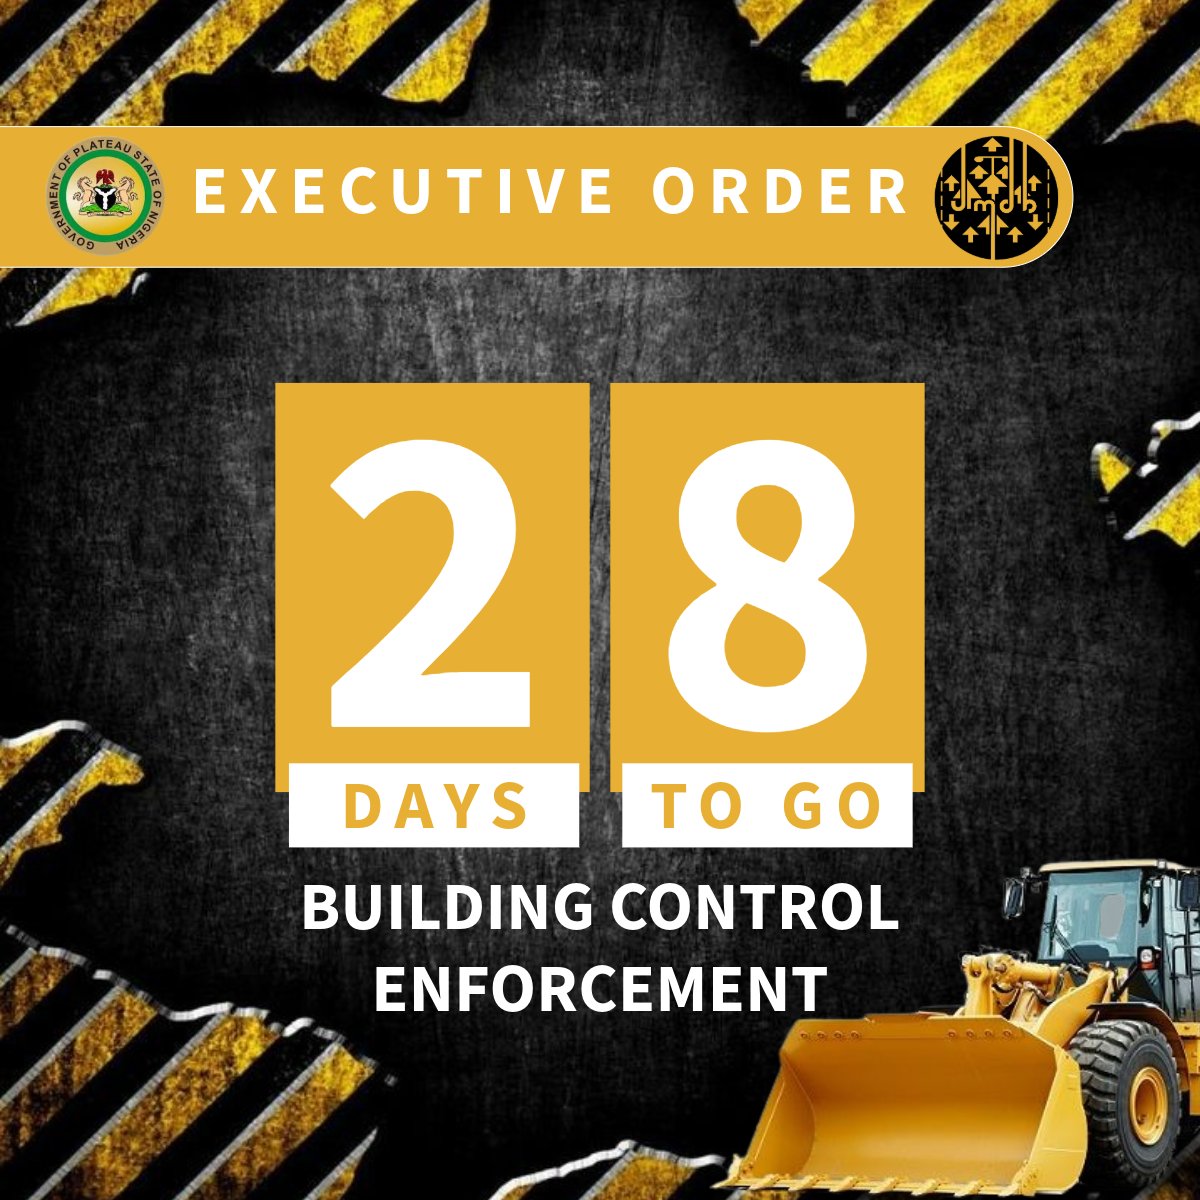 Rise and shine, Plateau State! Monday's here to kickstart our week with a reminder: in just 28 days, building control enforcement begins. Let's take proactive steps to ensure compliance and safety. Every action we take today builds a better tomorrow. The Time is Now!